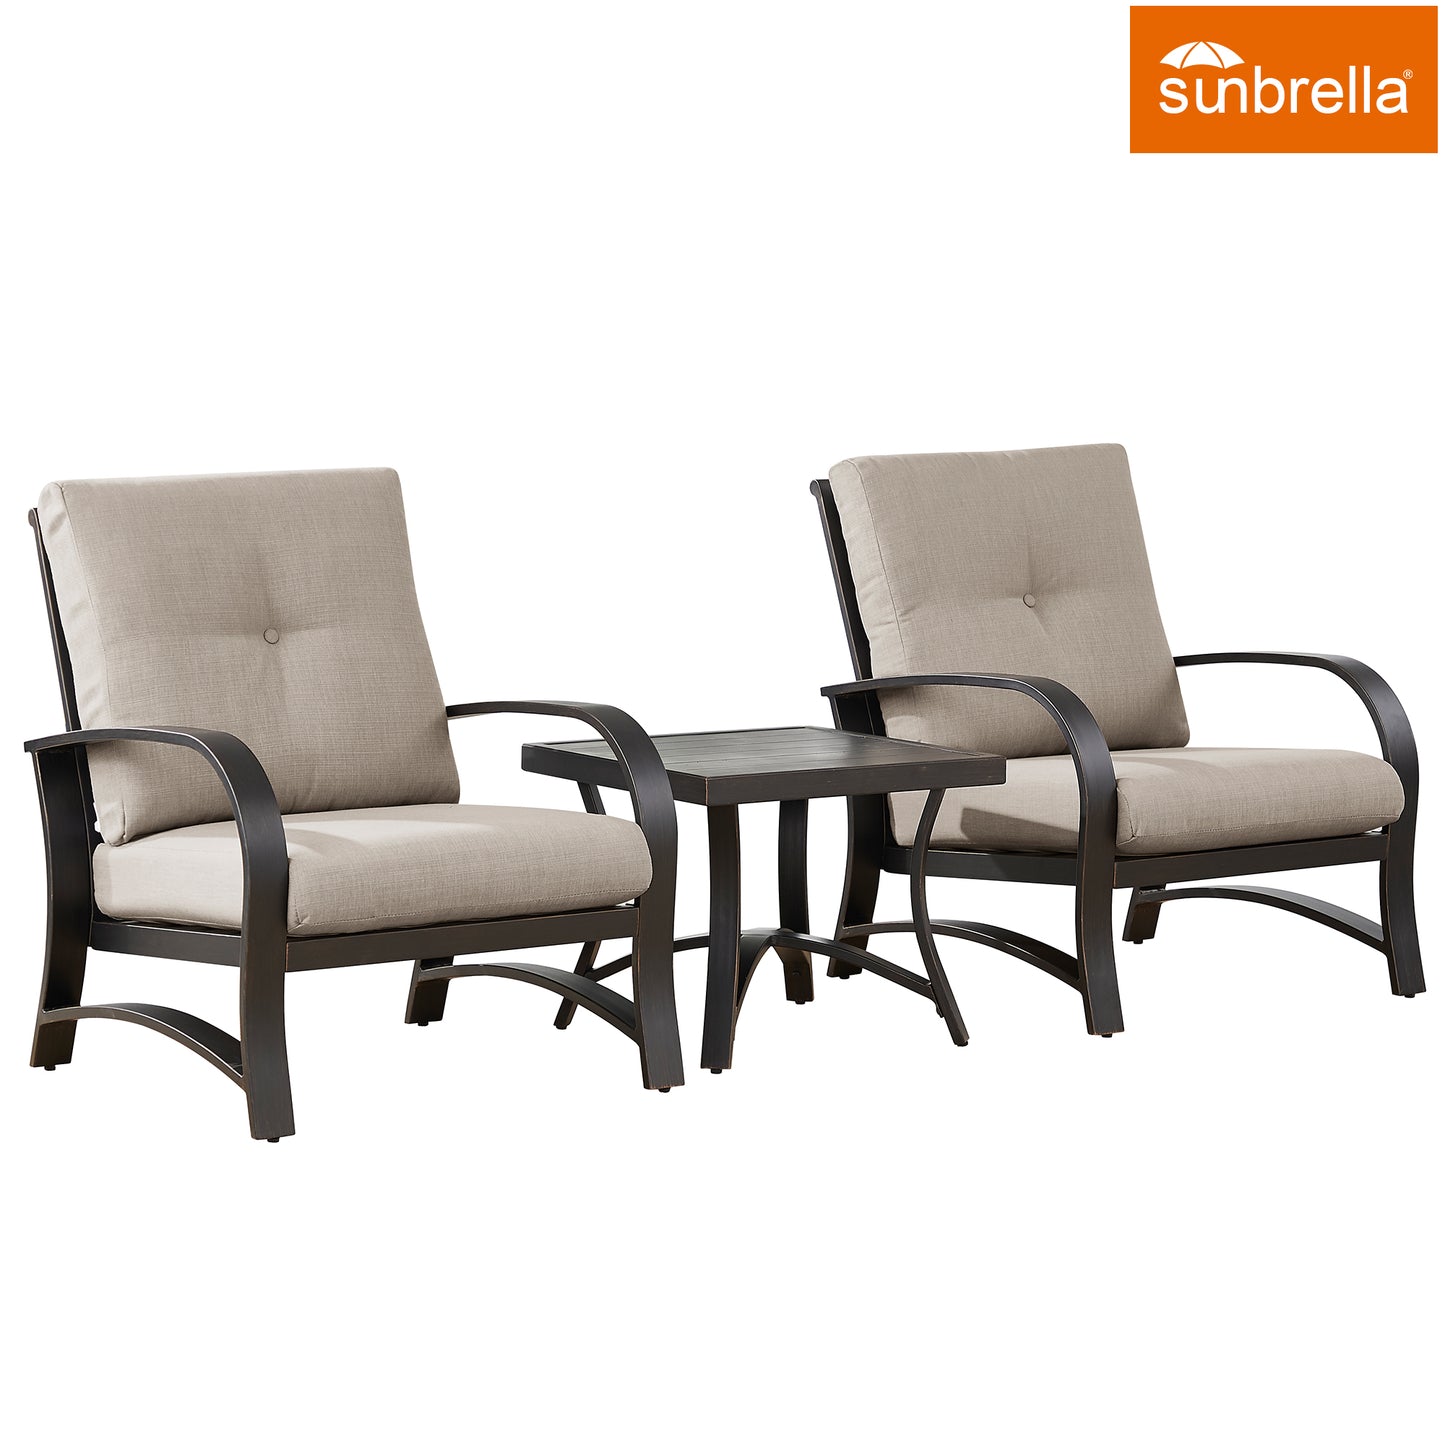 3 Pieces Outdoor/Indoor Aluminum Patio Conversation Seating Group with Sunbrella Cushions and Side Table